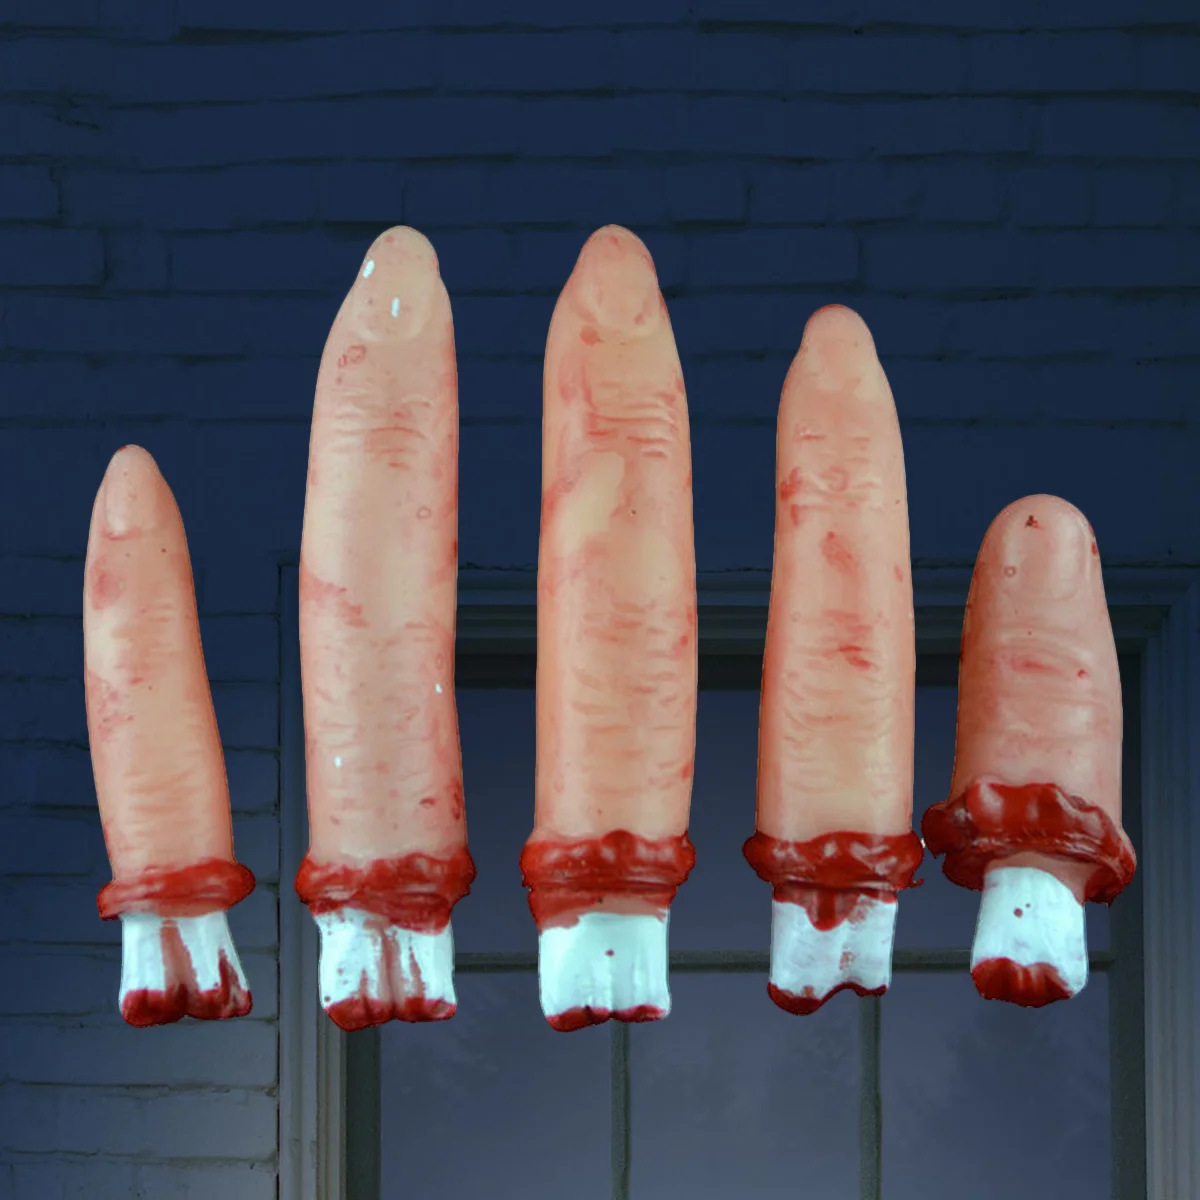 

5pcs Halloween Props Simulation Fingers Realistic Horror Novetly Toys Simulation Blood Broken Finger Haunted house Decorations